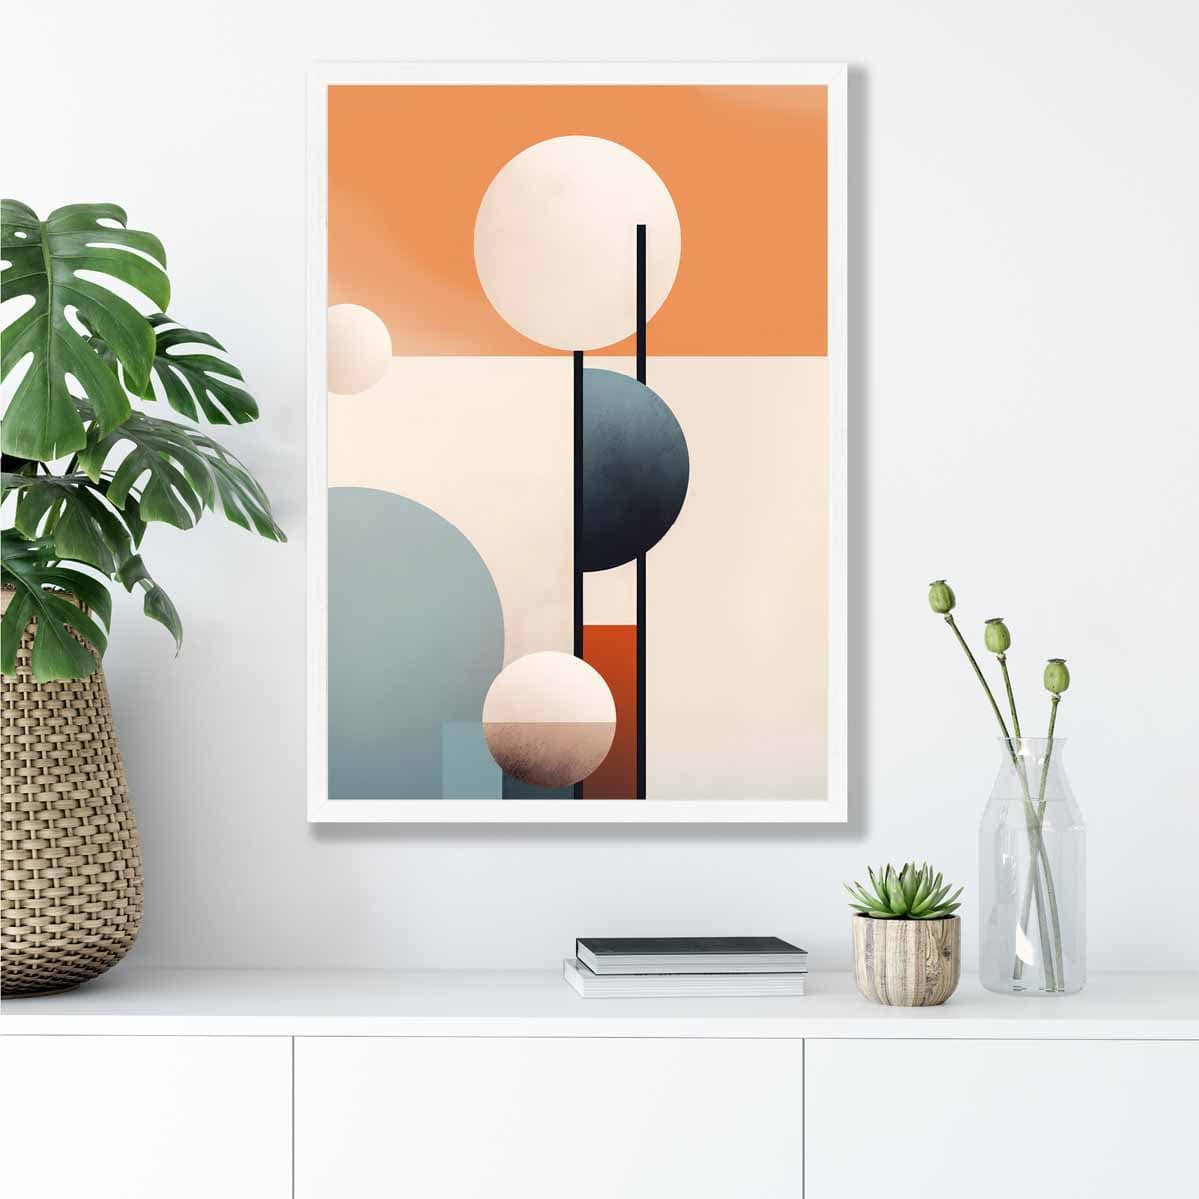 Abstract Shapes Art Print Navy Orange and Beige No 1